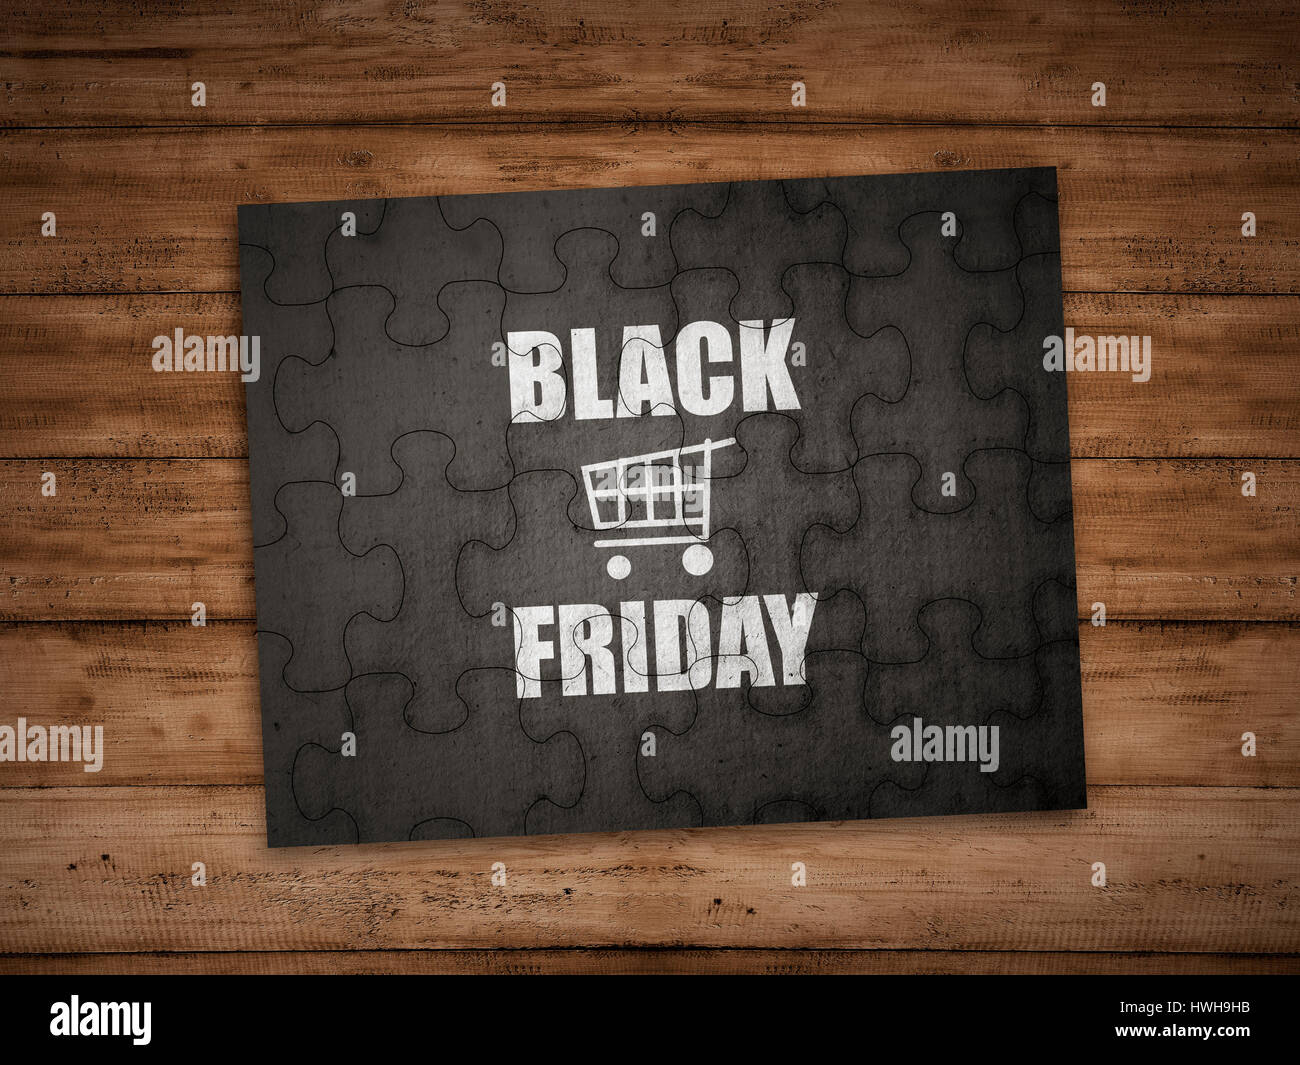 Black friday writing on puzzle over wooden background Stock Photo